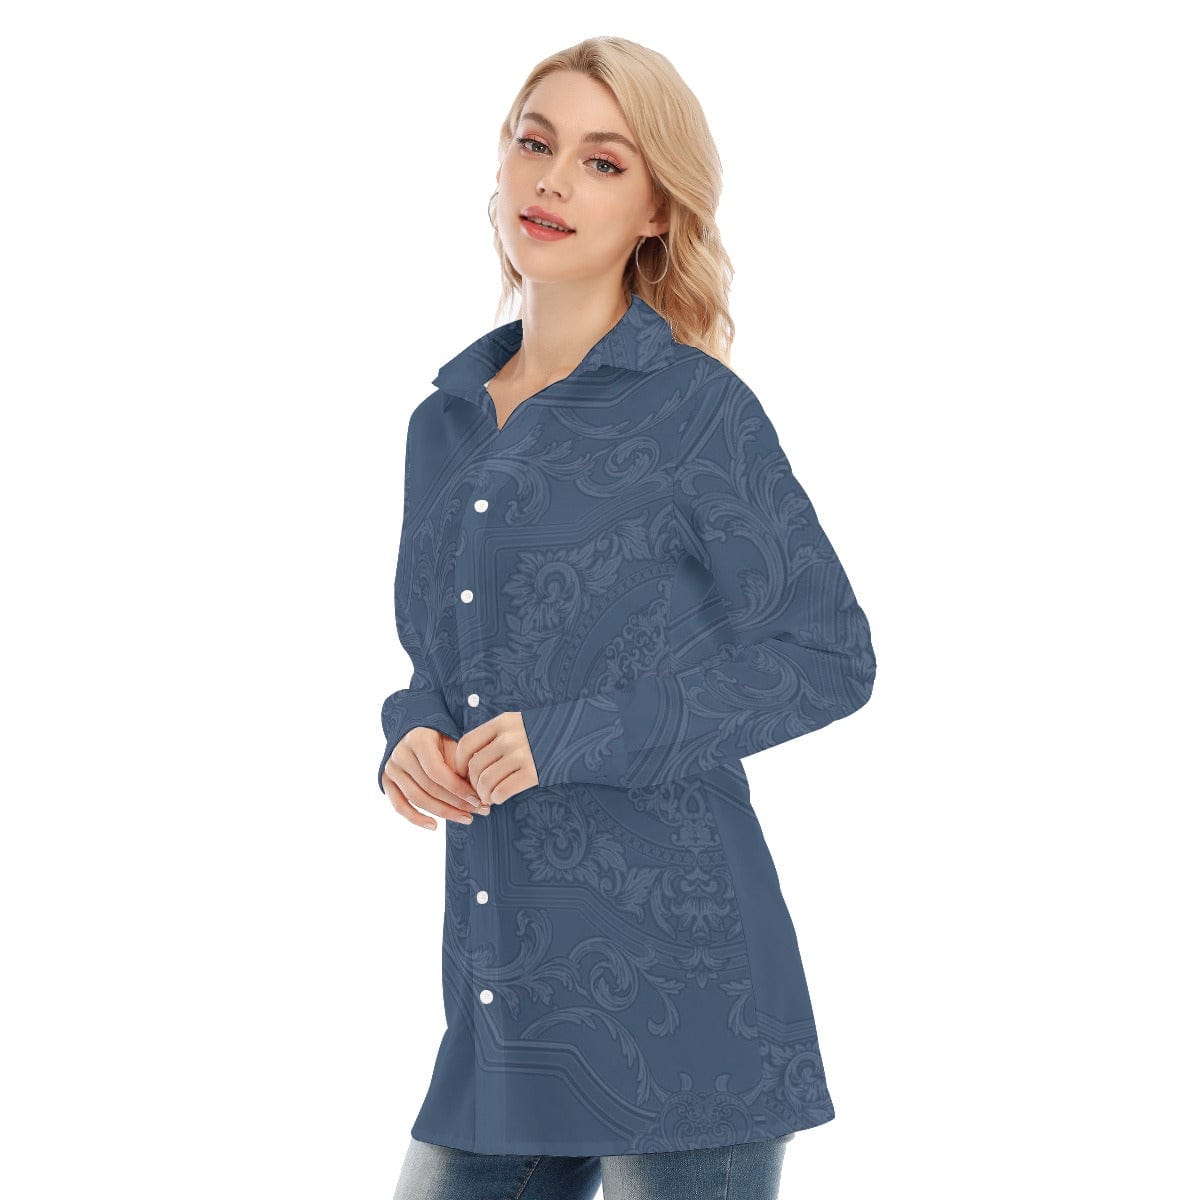 3R9FA All-Over Print Women's Long Shirt |115GSM  98% Cotton and 2% spandex